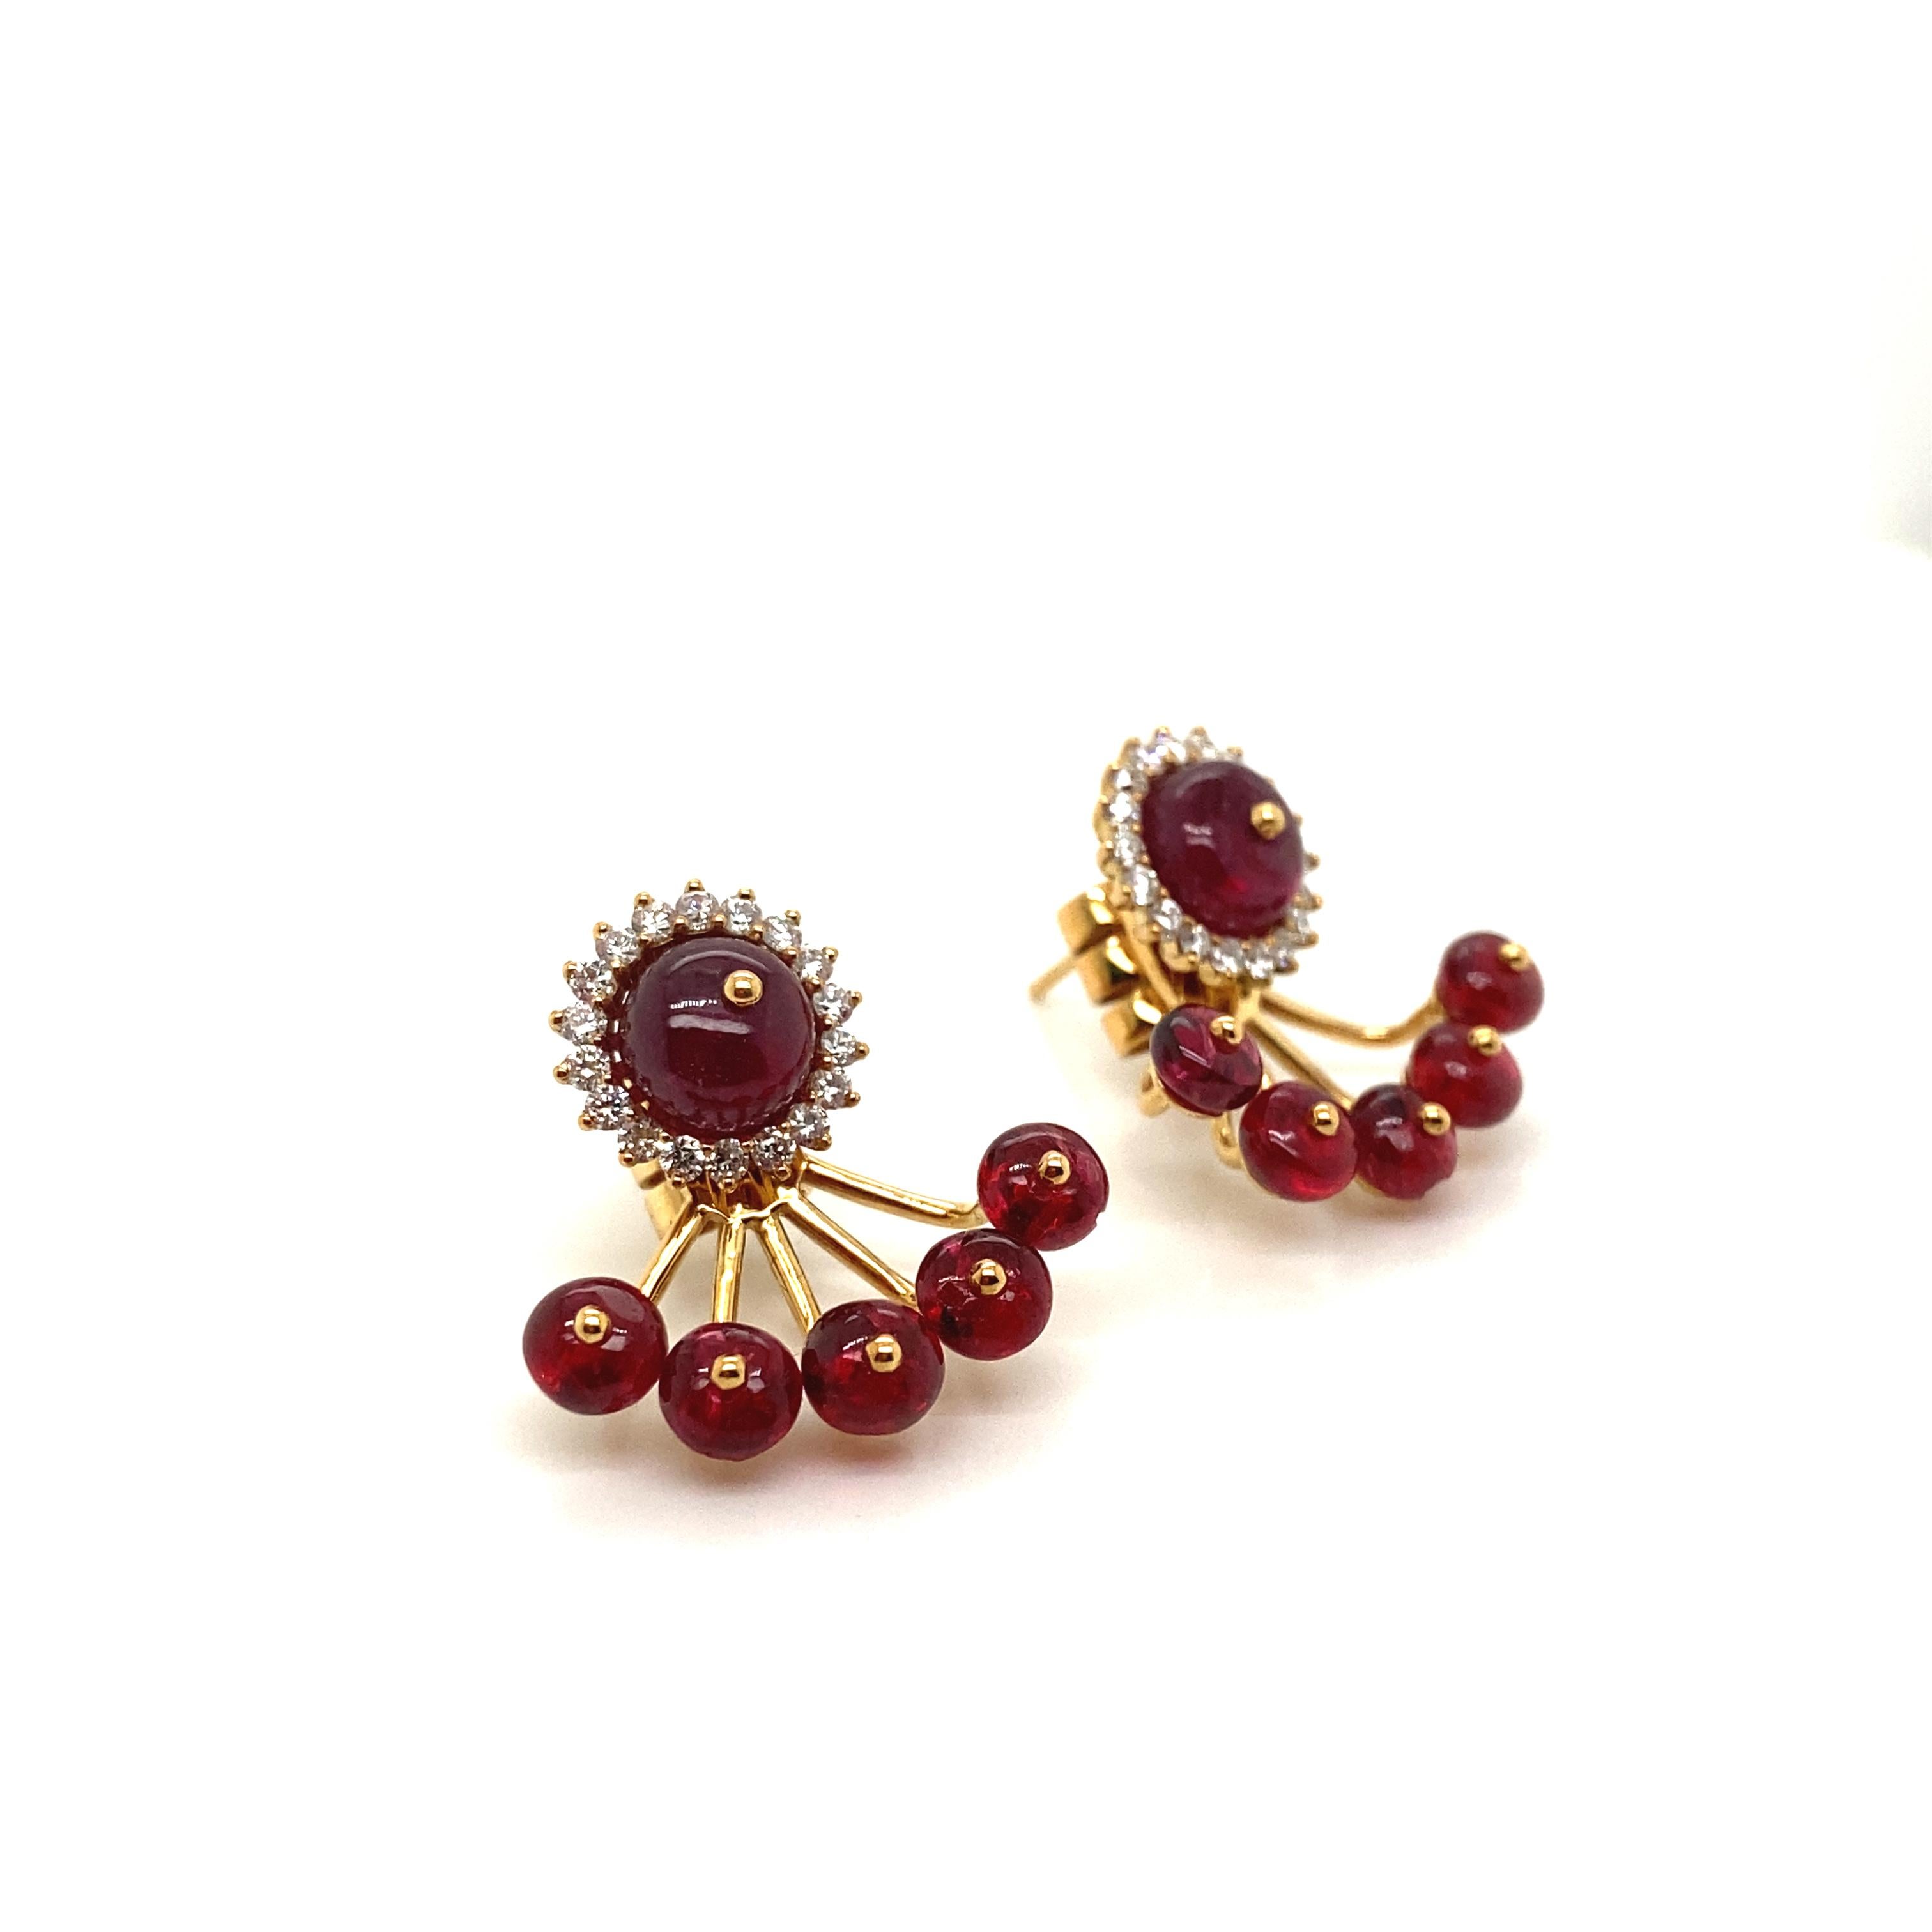 12.98 Carat Natural Red Spinel Beads and Diamond Gold Earrings For Sale 2